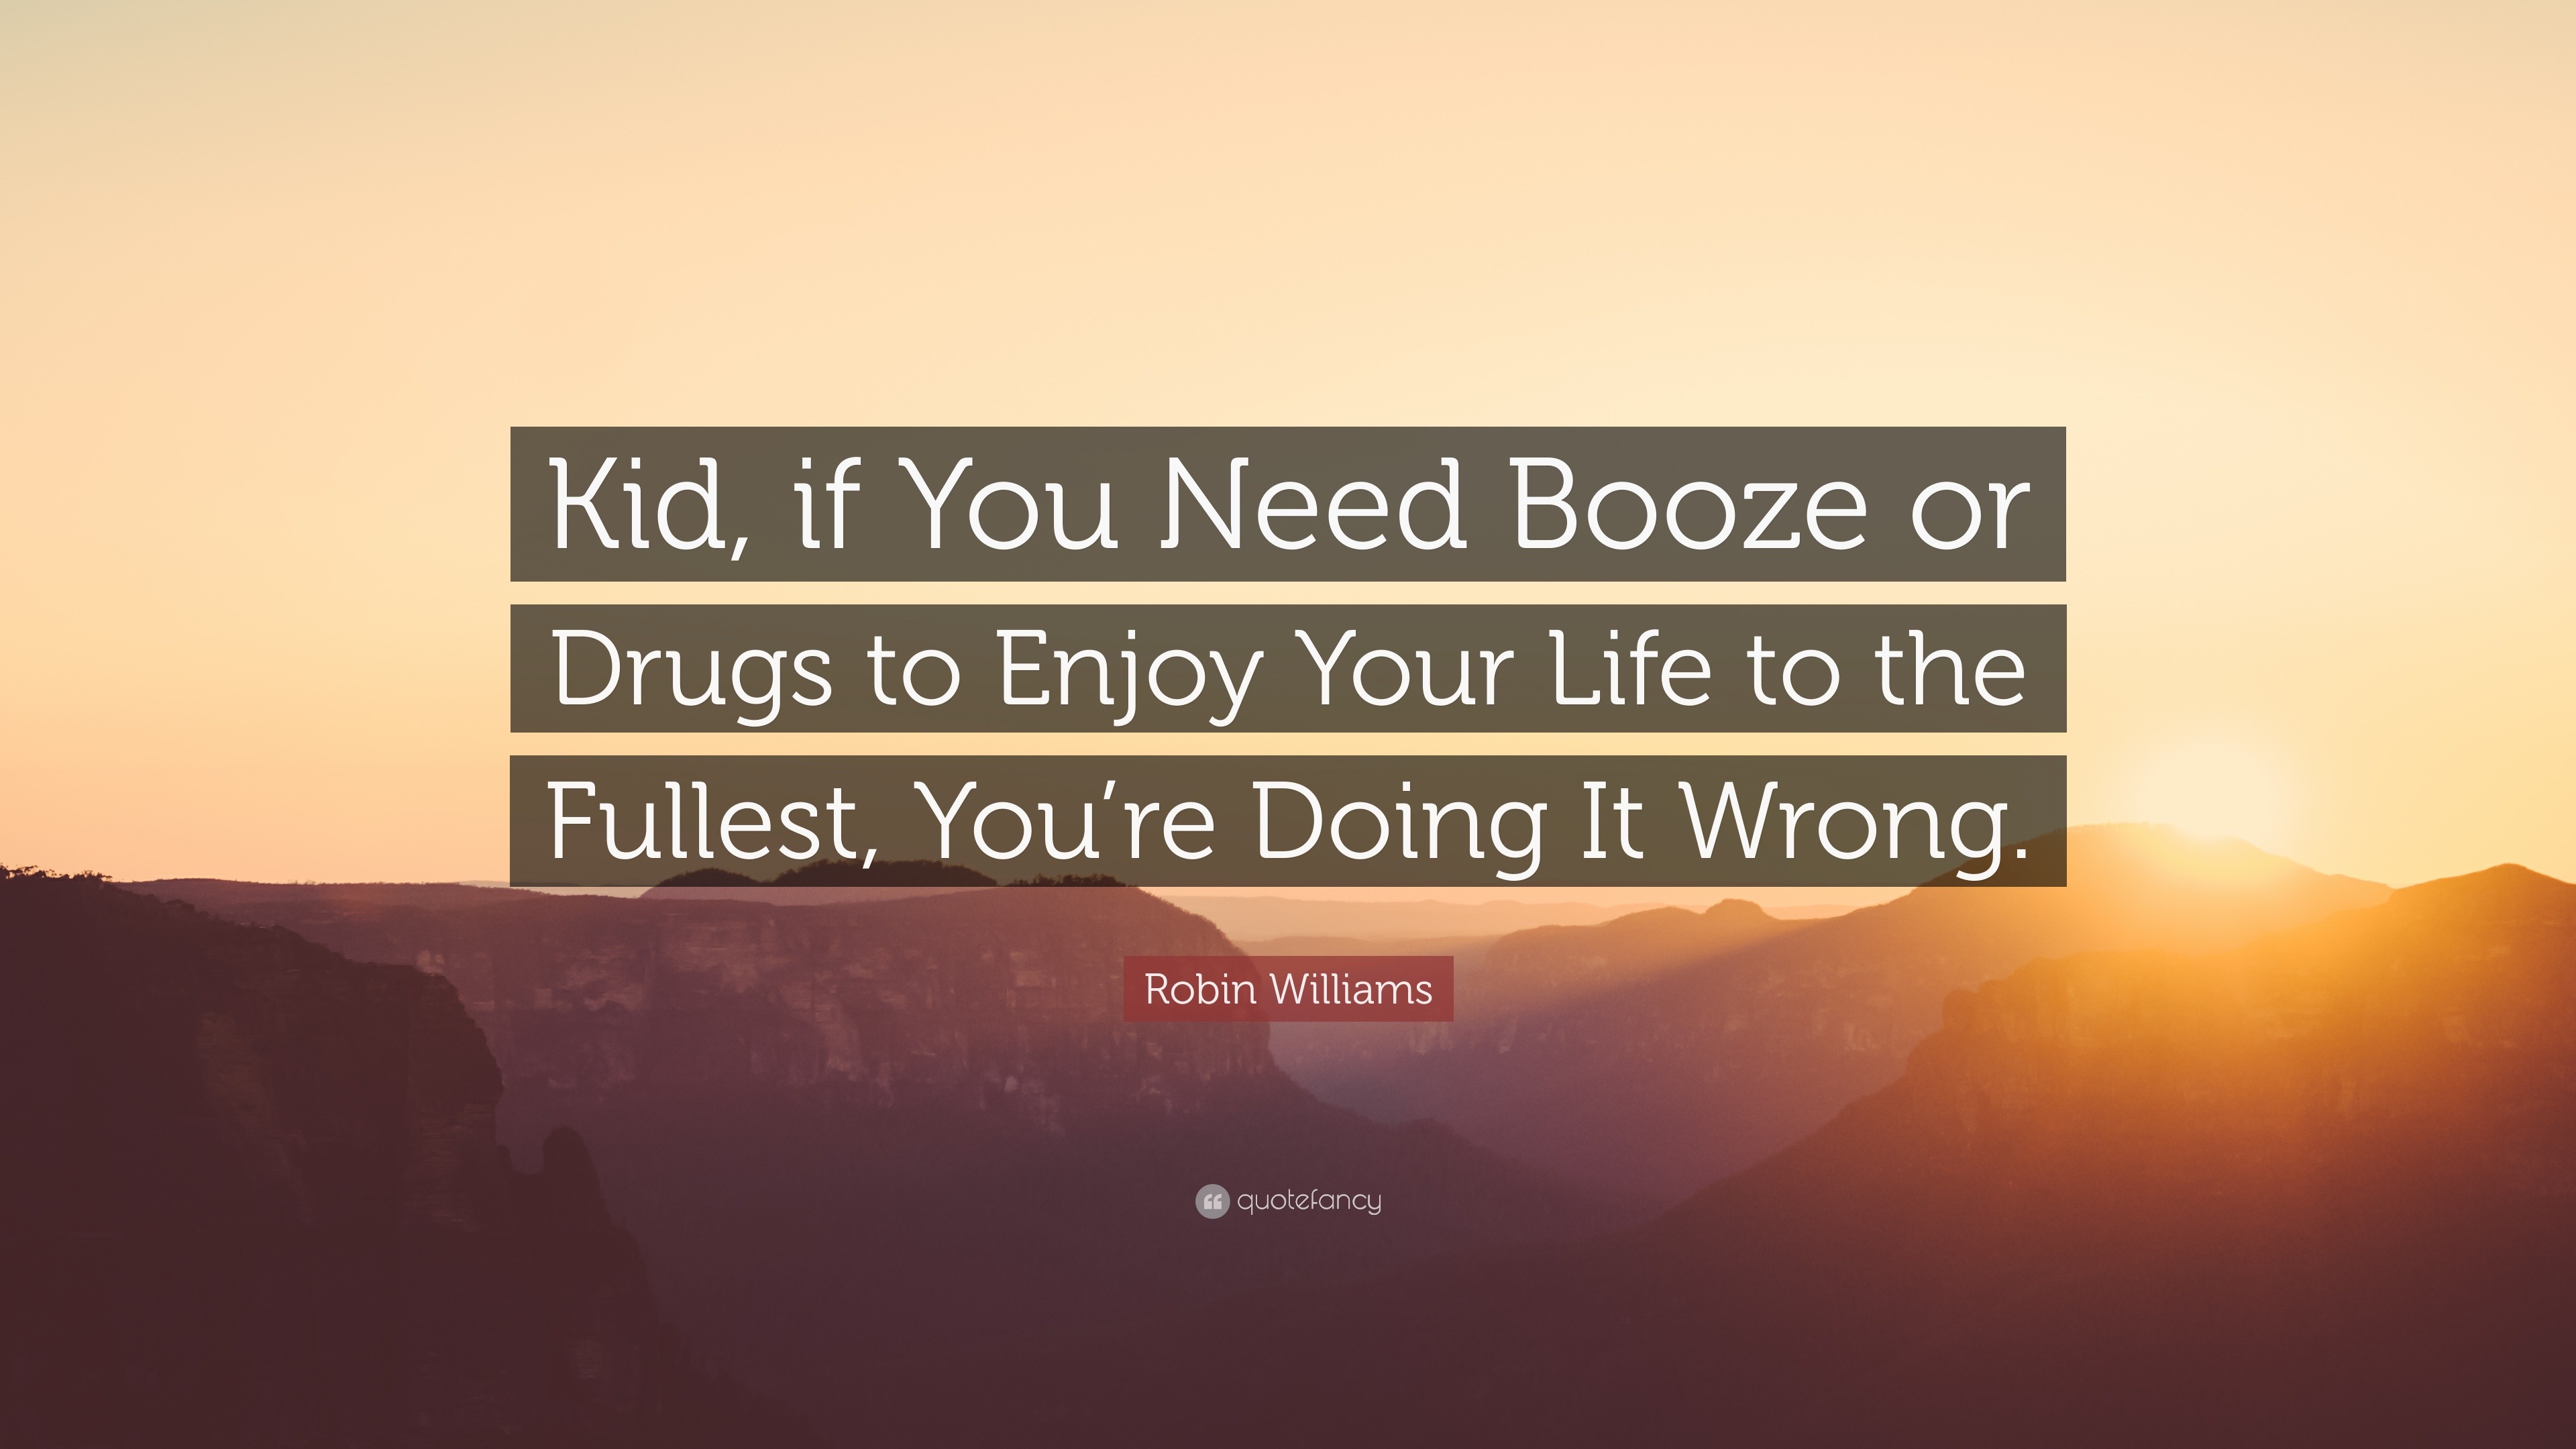 Robin Williams Quote “Kid if You Need Booze or Drugs to Enjoy Your